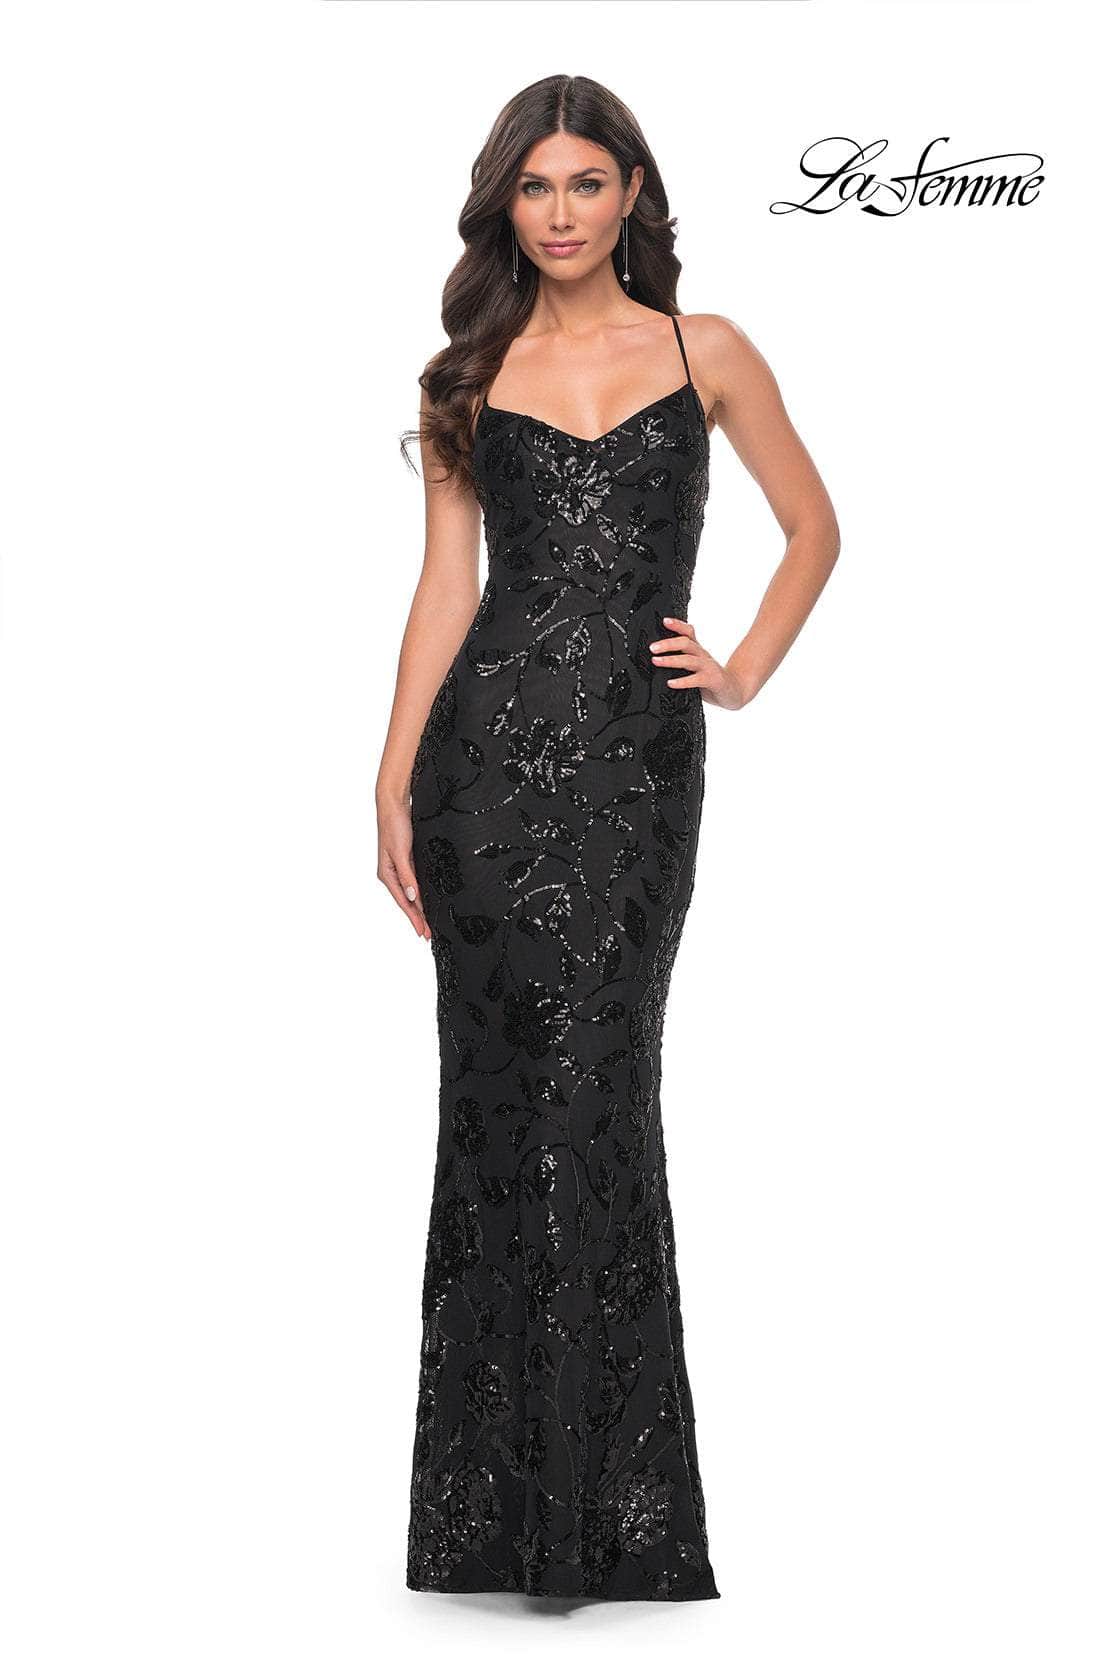 La Femme 32415 - Floral Sequin Sleeveless Prom Gown
